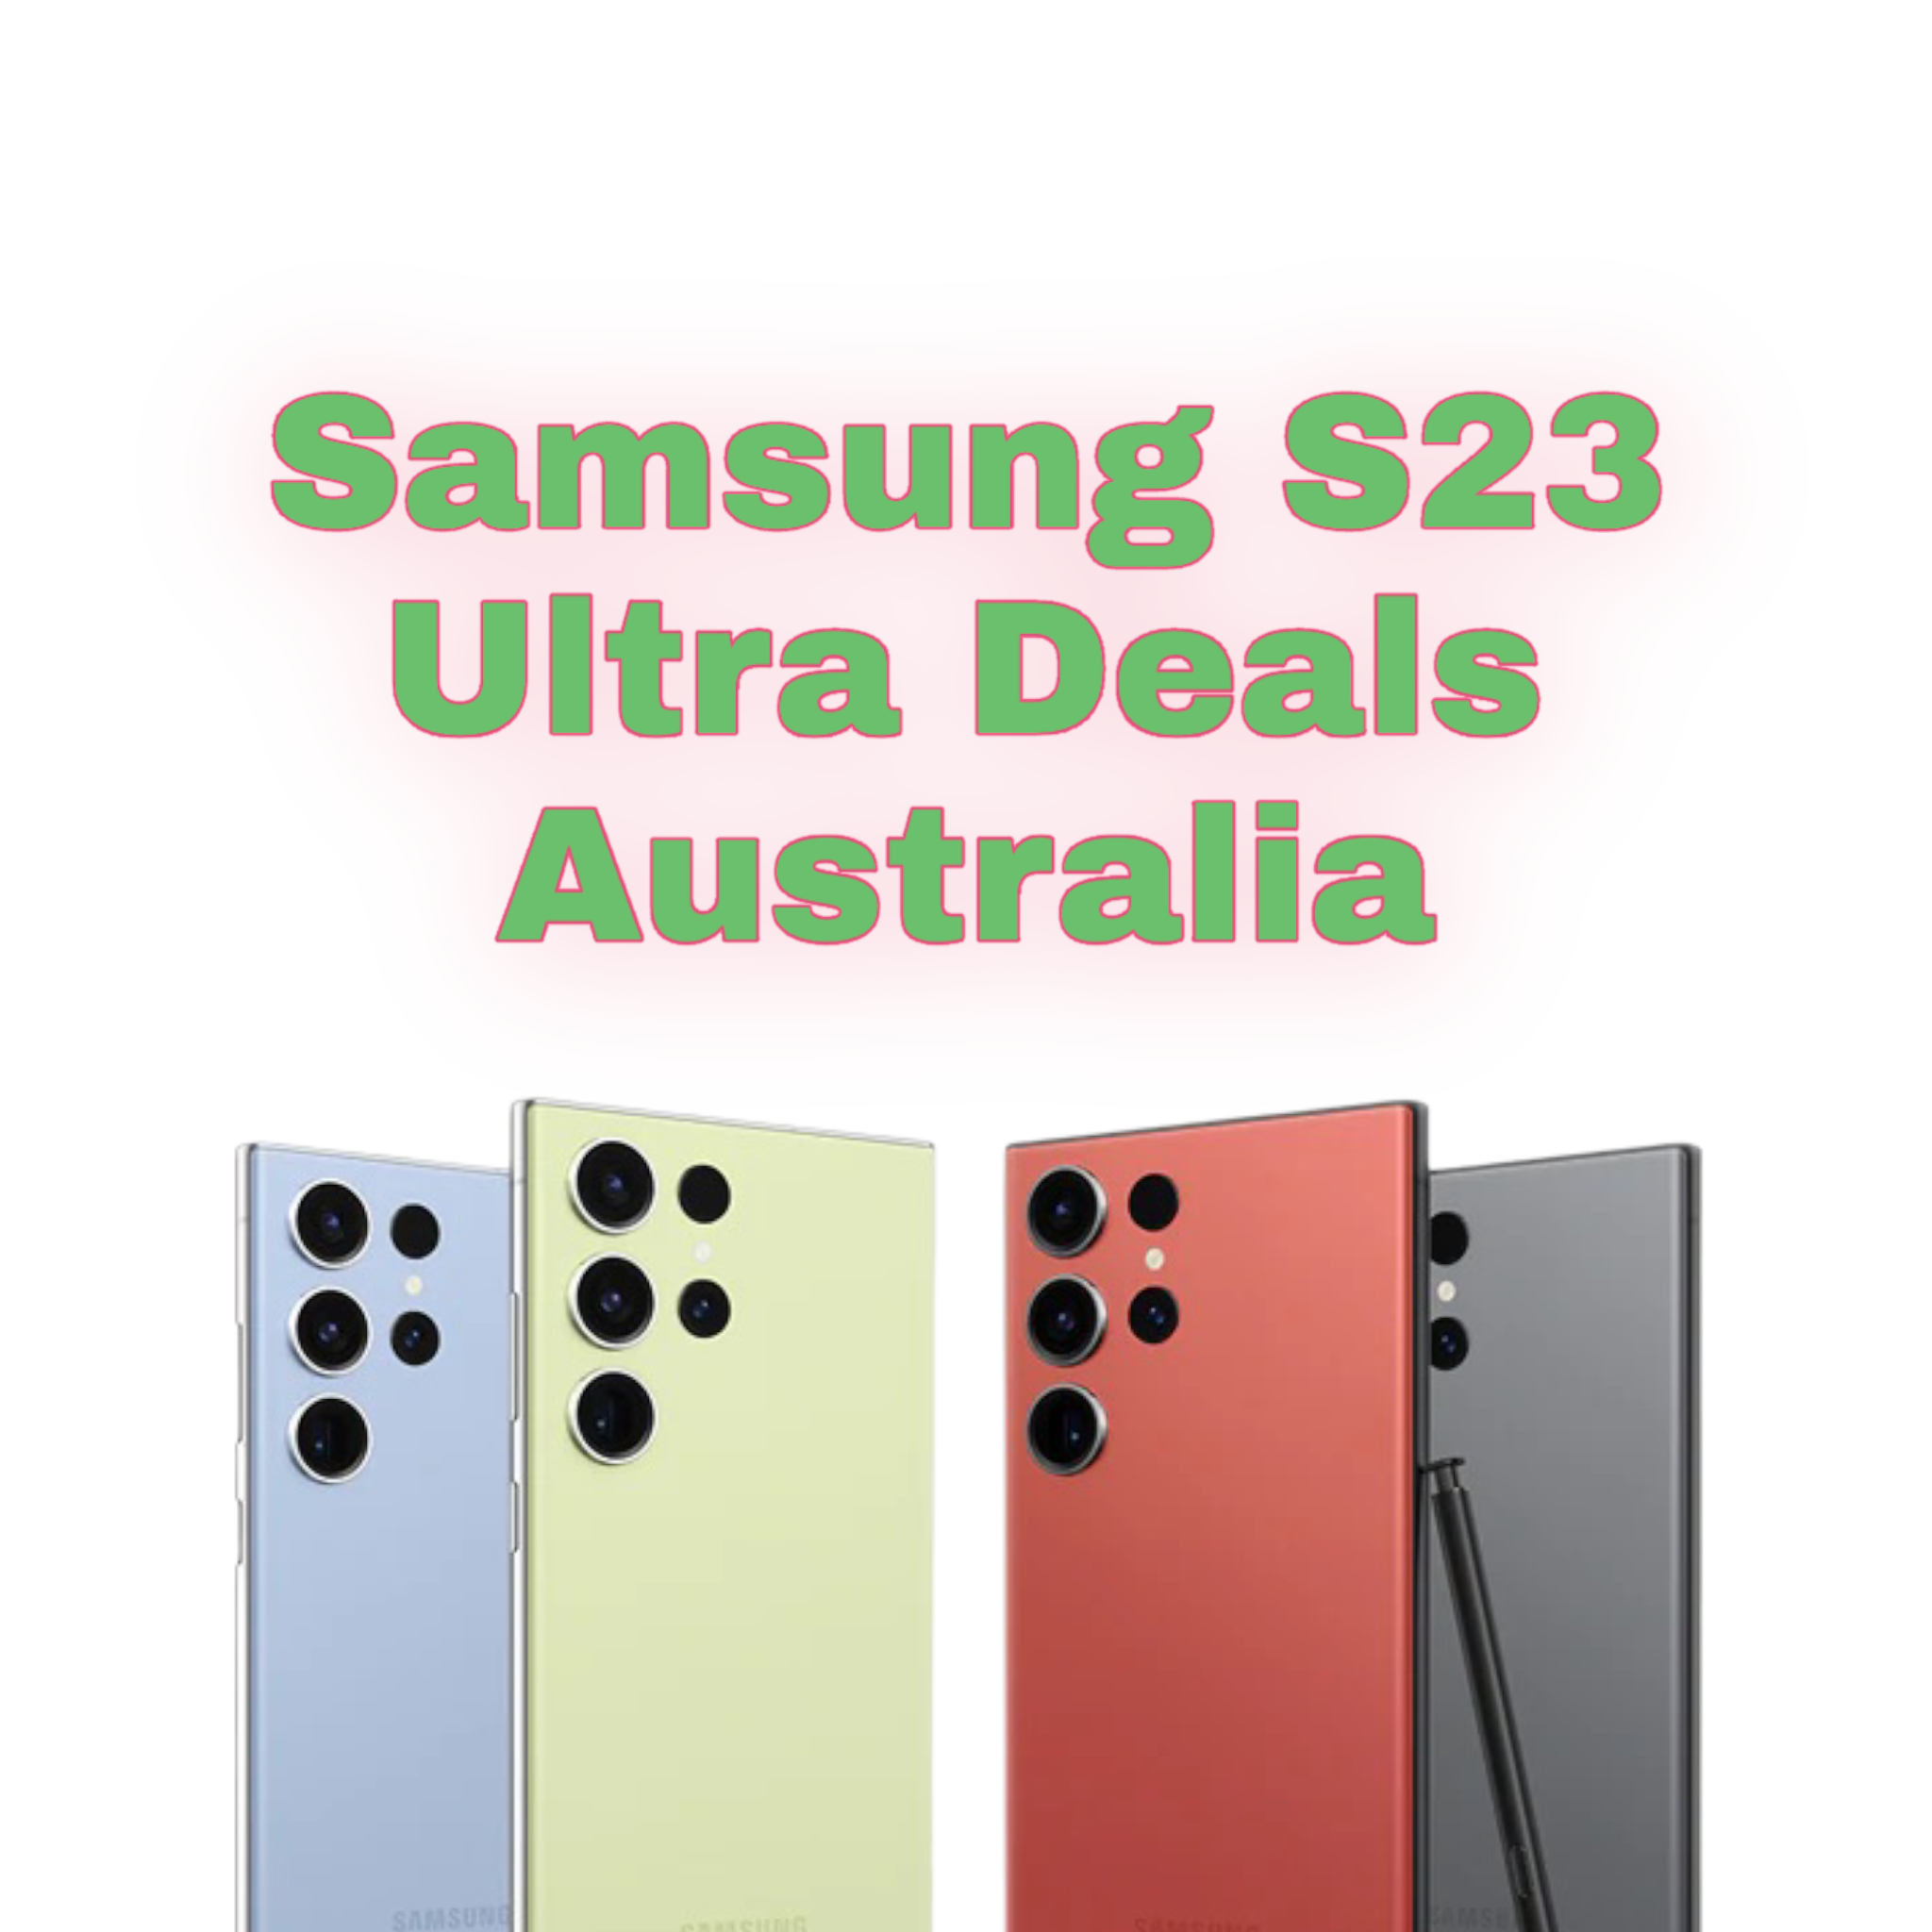 Buy the new Galaxy S23 Ultra, Price & Deals